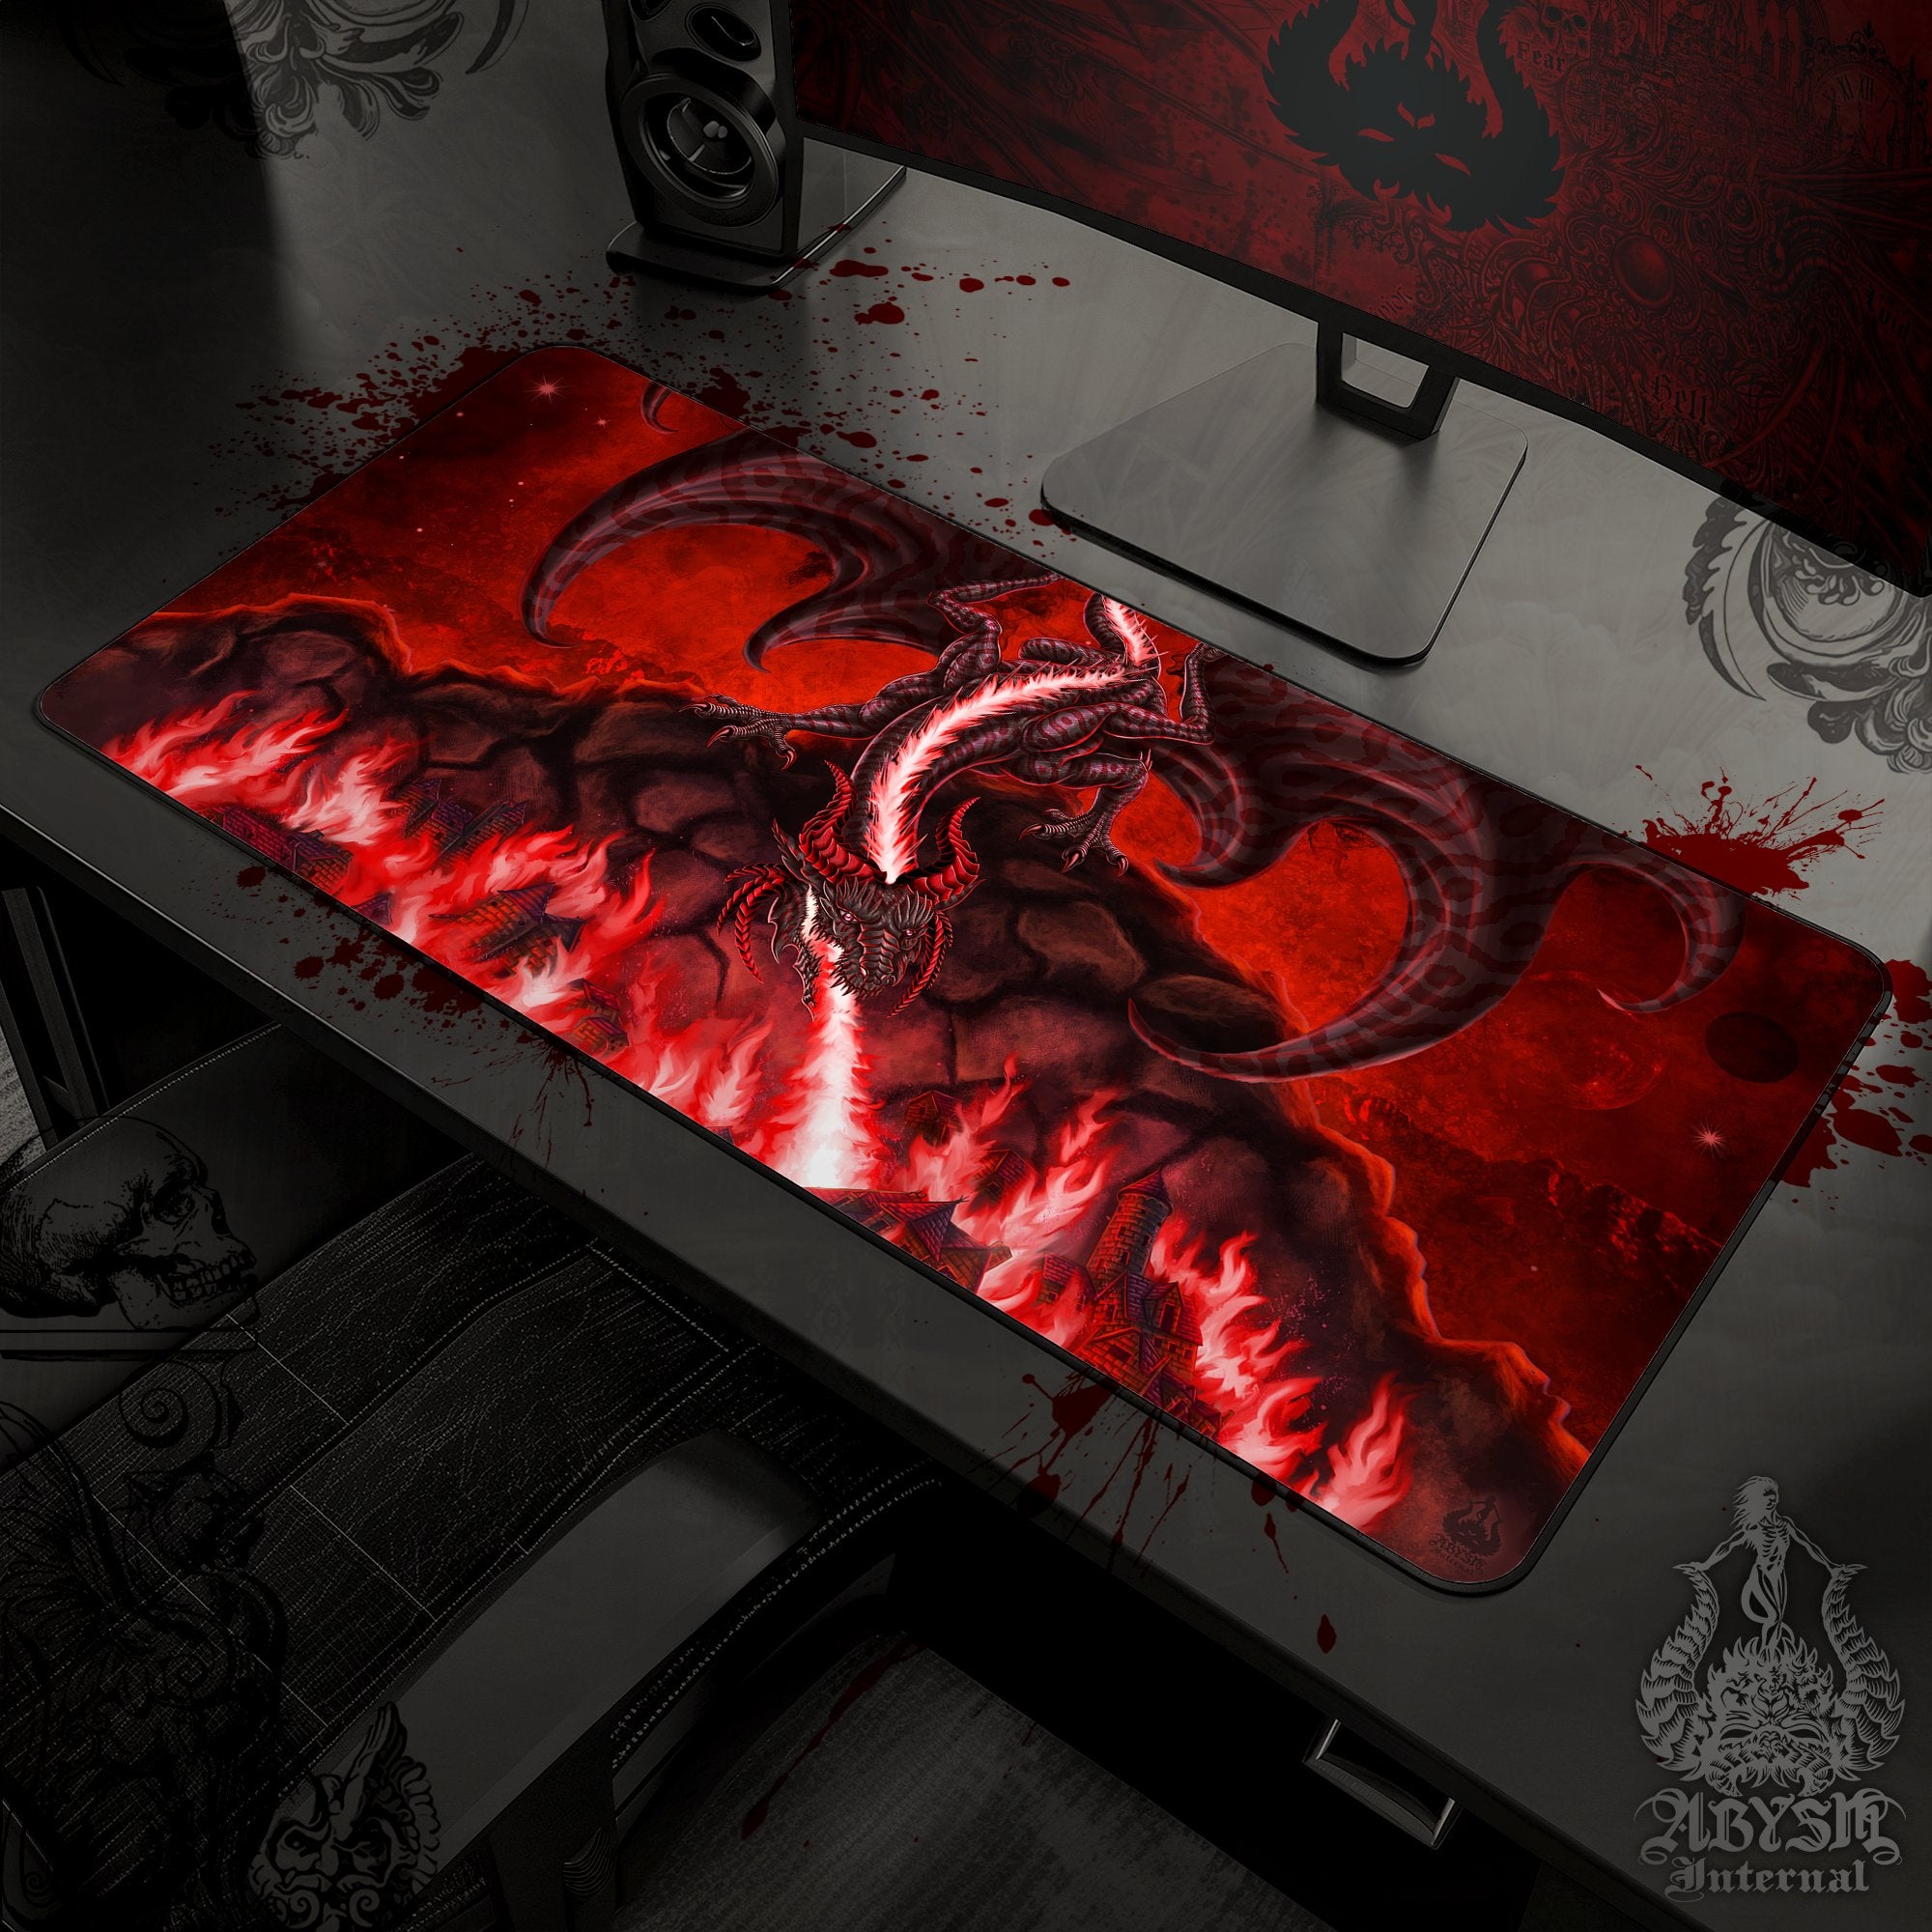 Dragon Gaming Desk Mat, Fantasy Art Mouse Pad, Red and Black Table Protector Cover, RPG Workpad, DM Gift Print - Fire - Abysm Internal